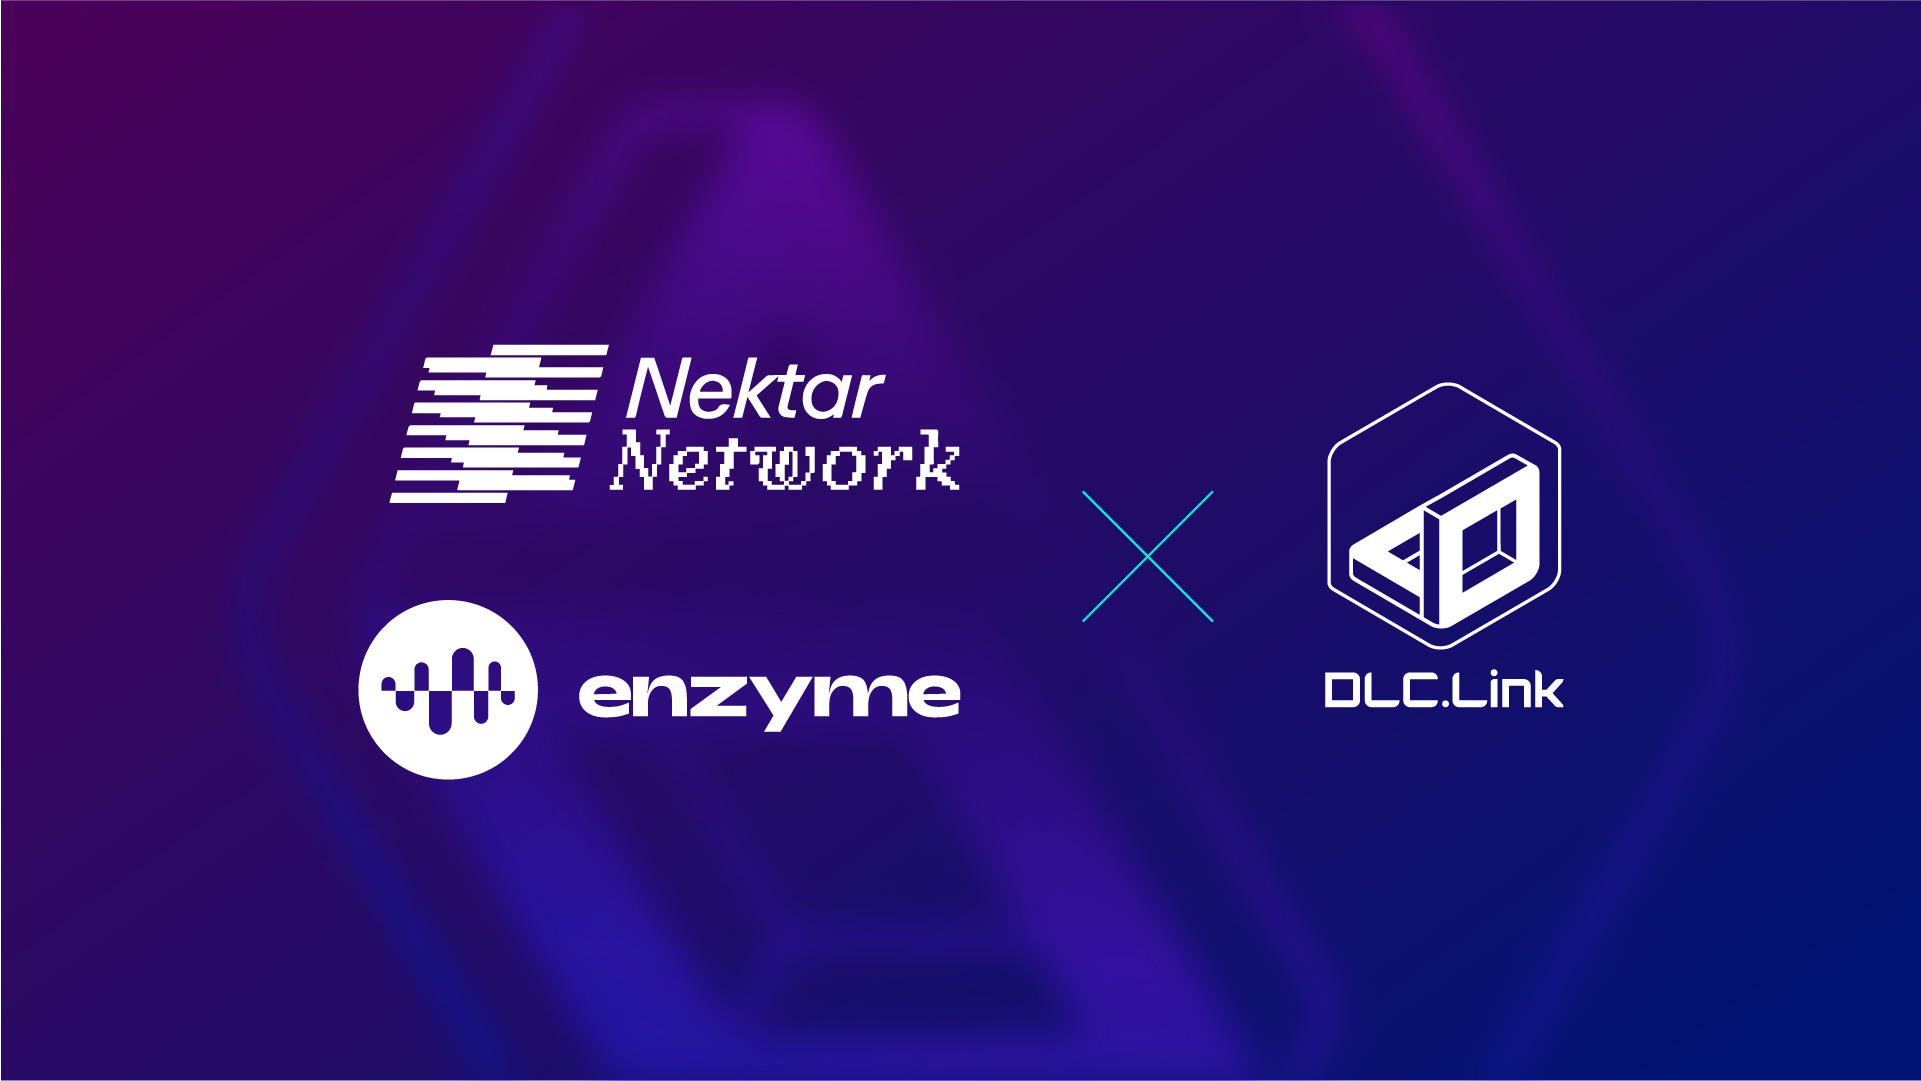 DLC.Link, Nektar, and Enzyme Partner to Launch Native BTC Staking on Ethereum Mainnet